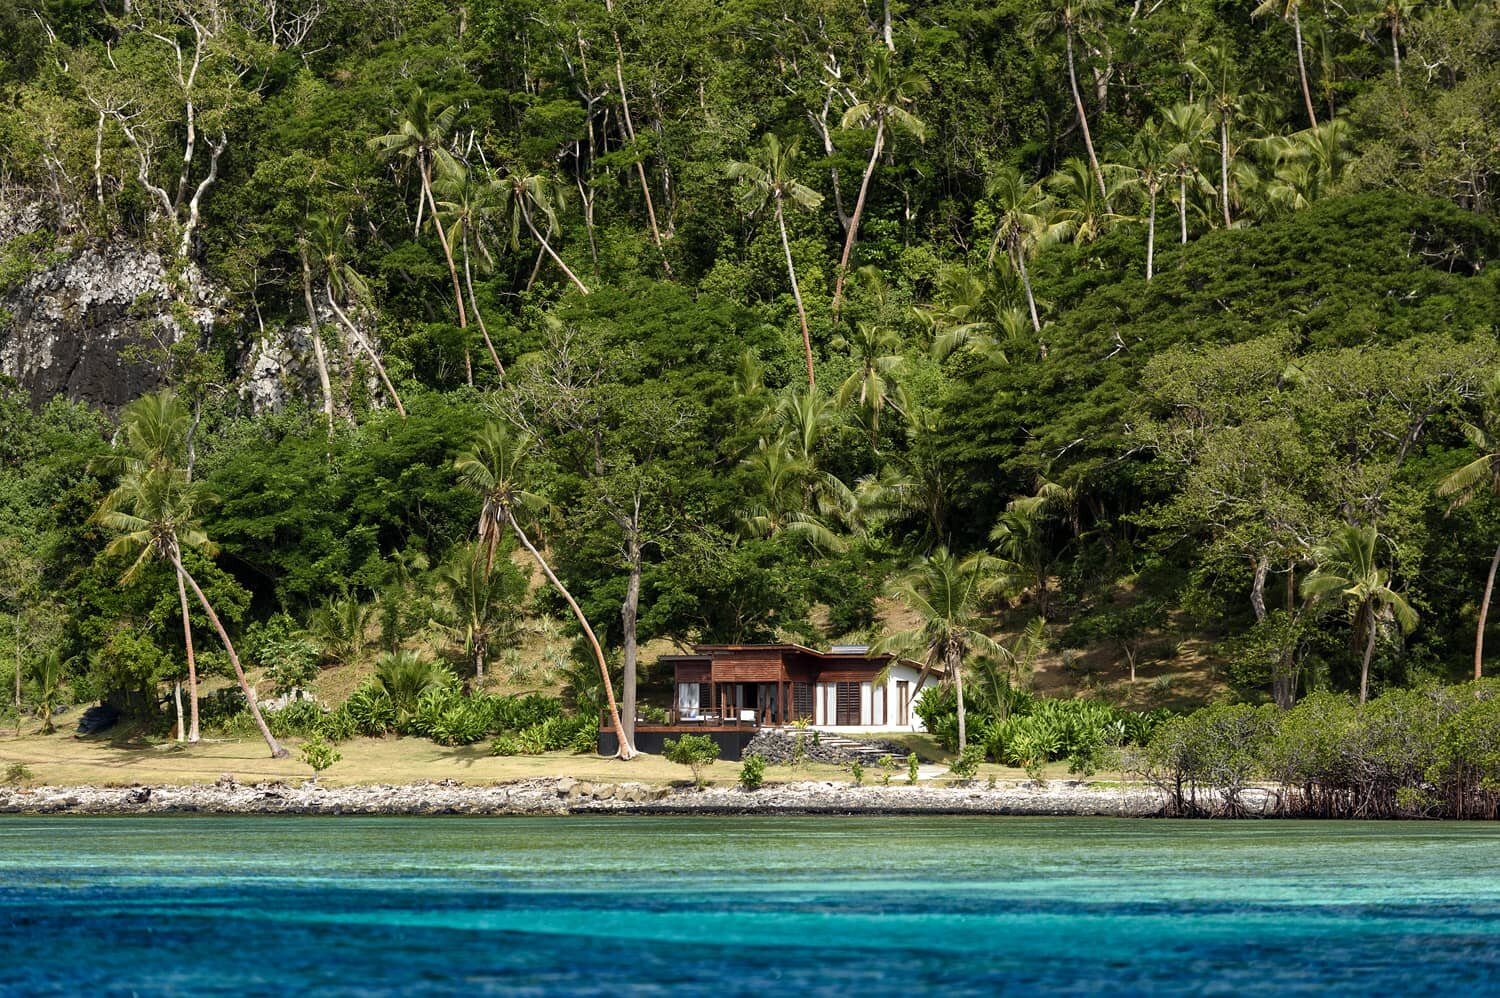 Two-bedroom Villa - View from the water, The Remote Resort Fiji Islands 